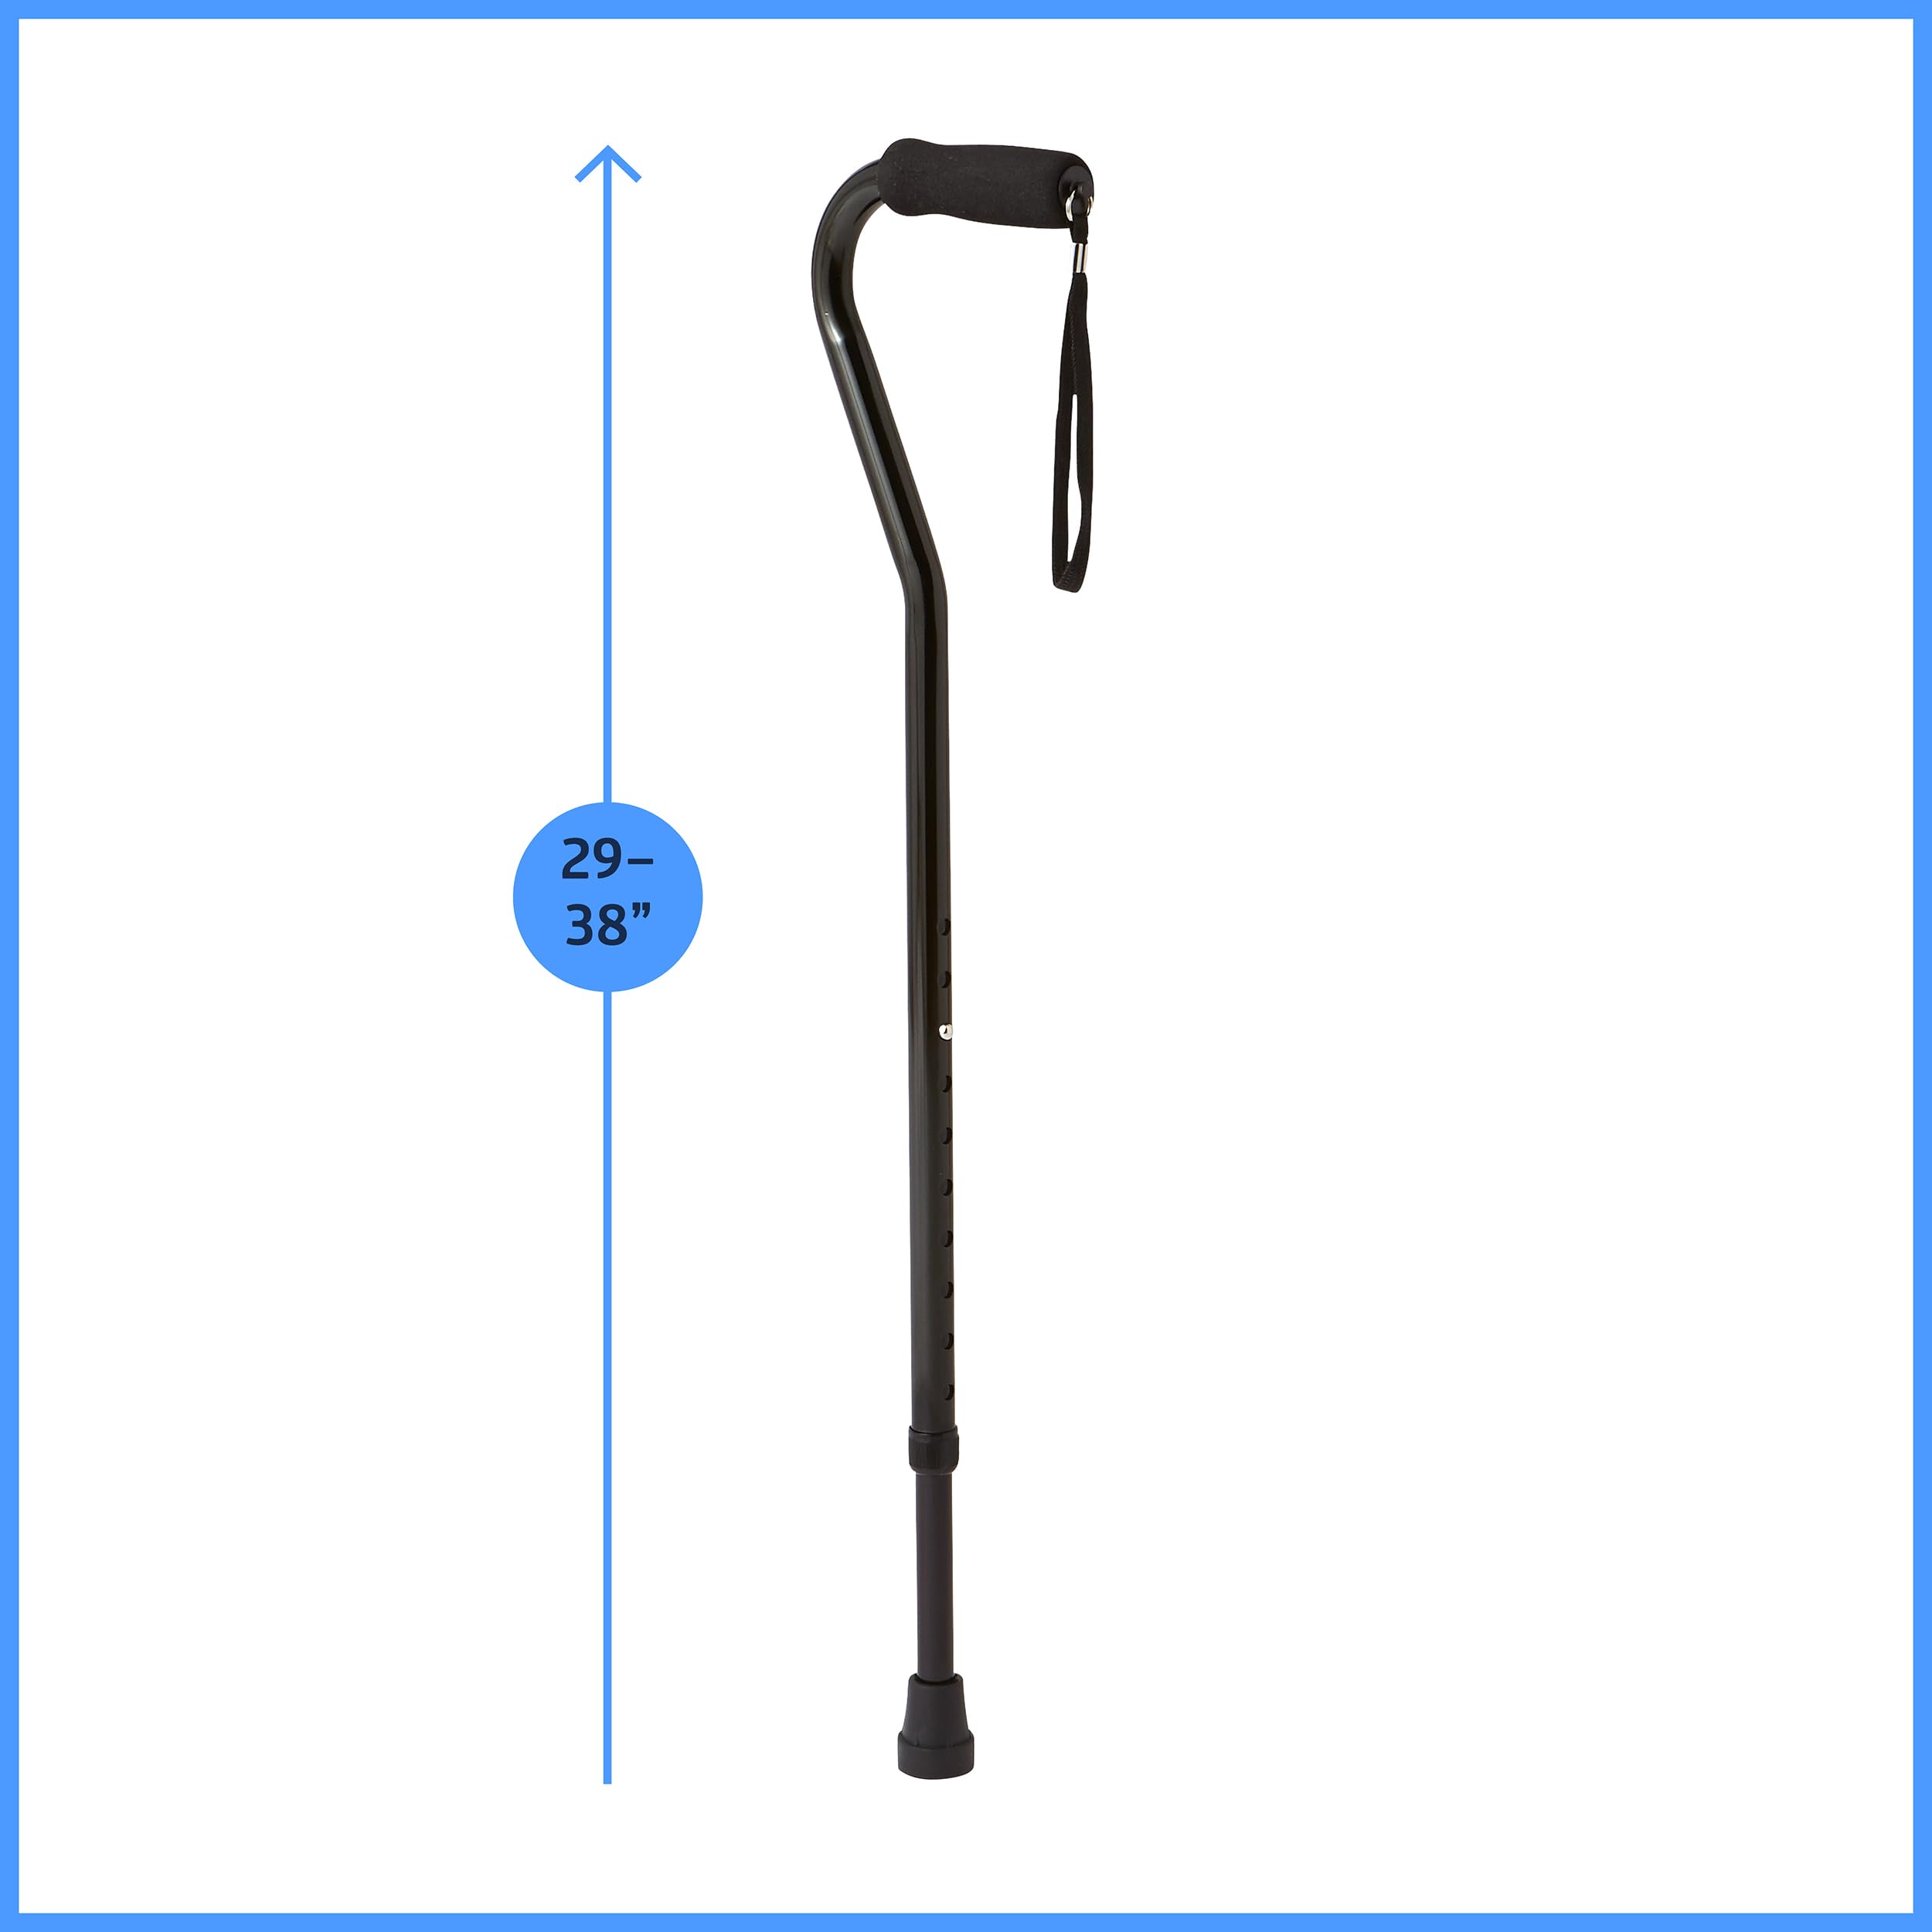 Medline Aluminum Offset Walking Cane for Seniors & Adults is Portable and Lightweight for Balance, Knee Injuries, Mobility & Leg Surgery Recovery